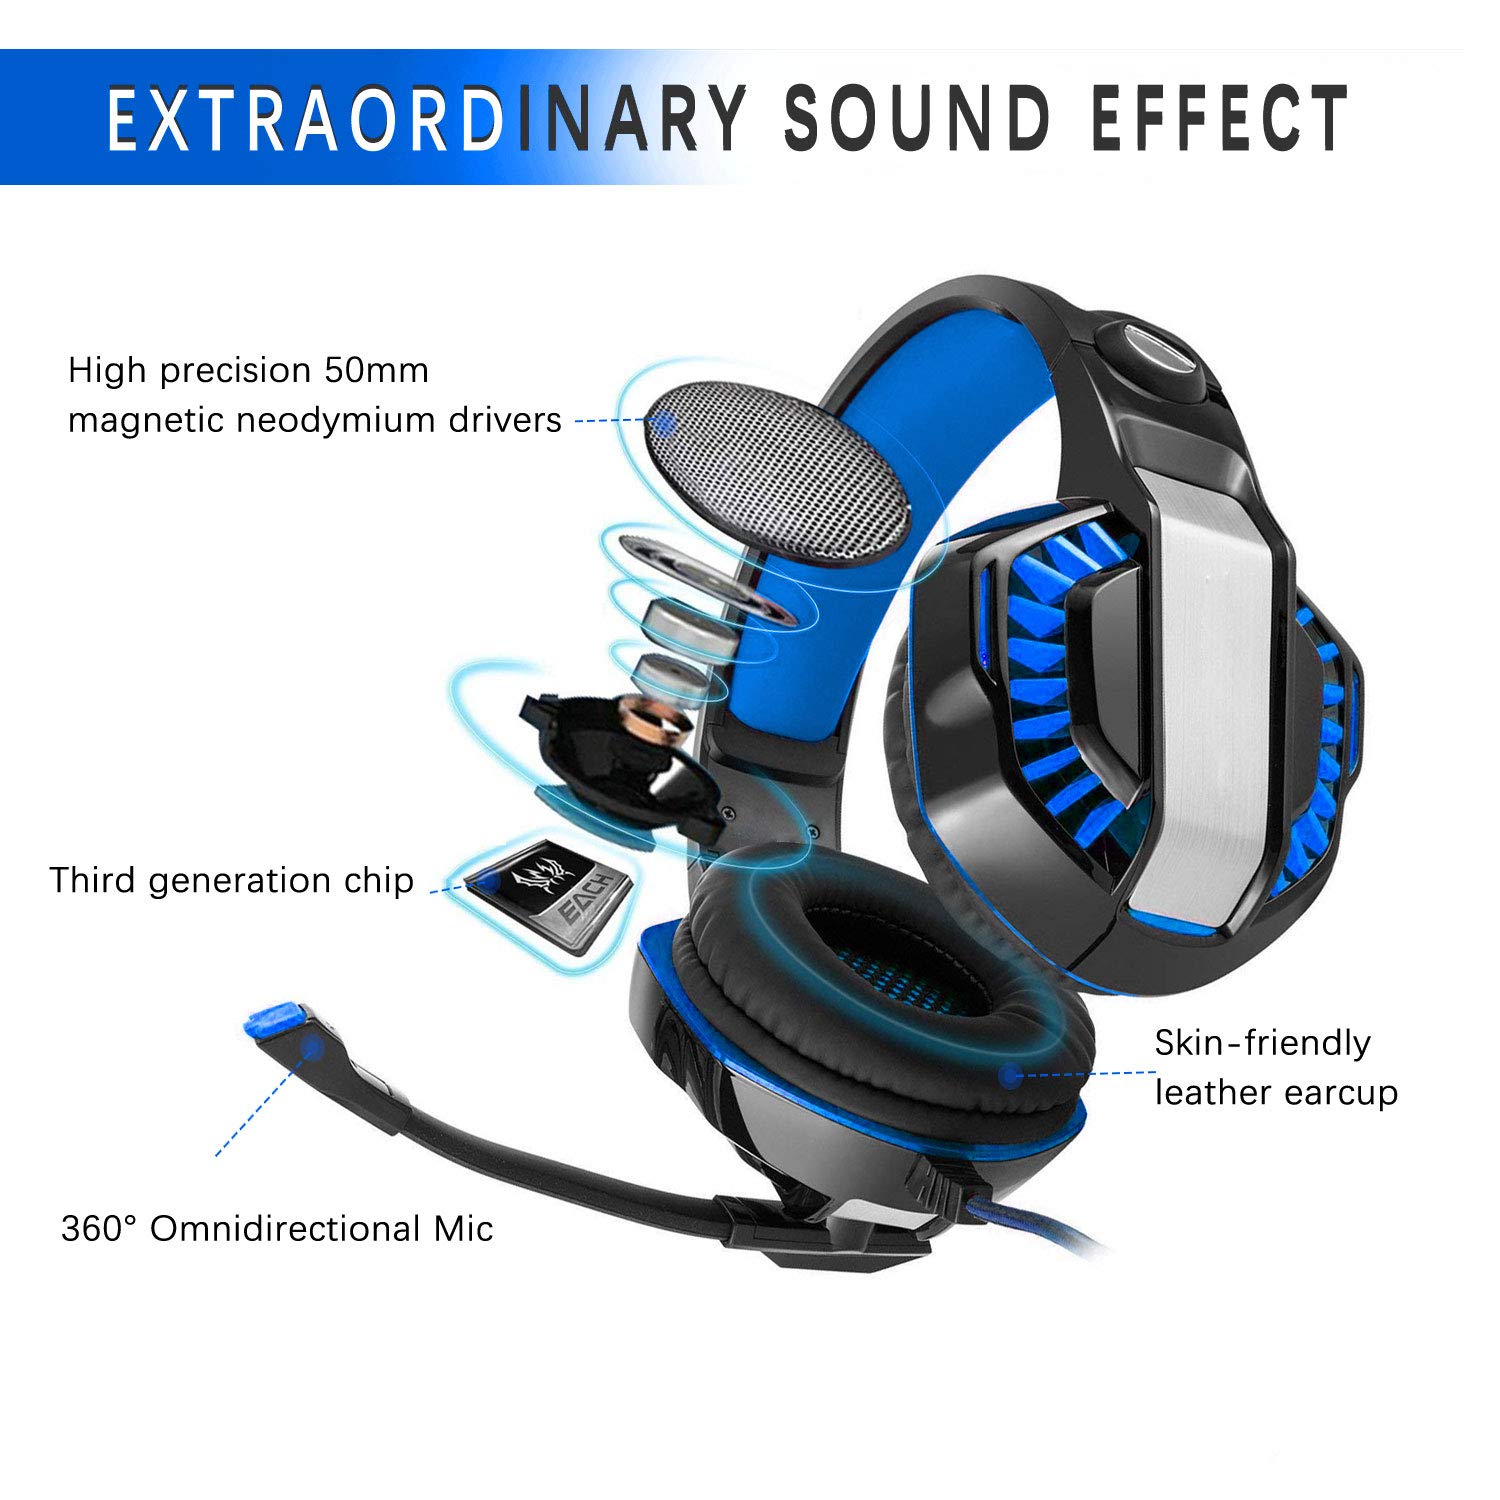 SVYHUOK White Gaming Headset for Xbox One,PS4,PC,Laptop,Tablet with Mic,Pro Over Ear Headphones,Two Free 3.5mm Y Splitter,Noise Canceling,USB Led Light,Stereo Bass Surround for Kids,Mac,Smartphones